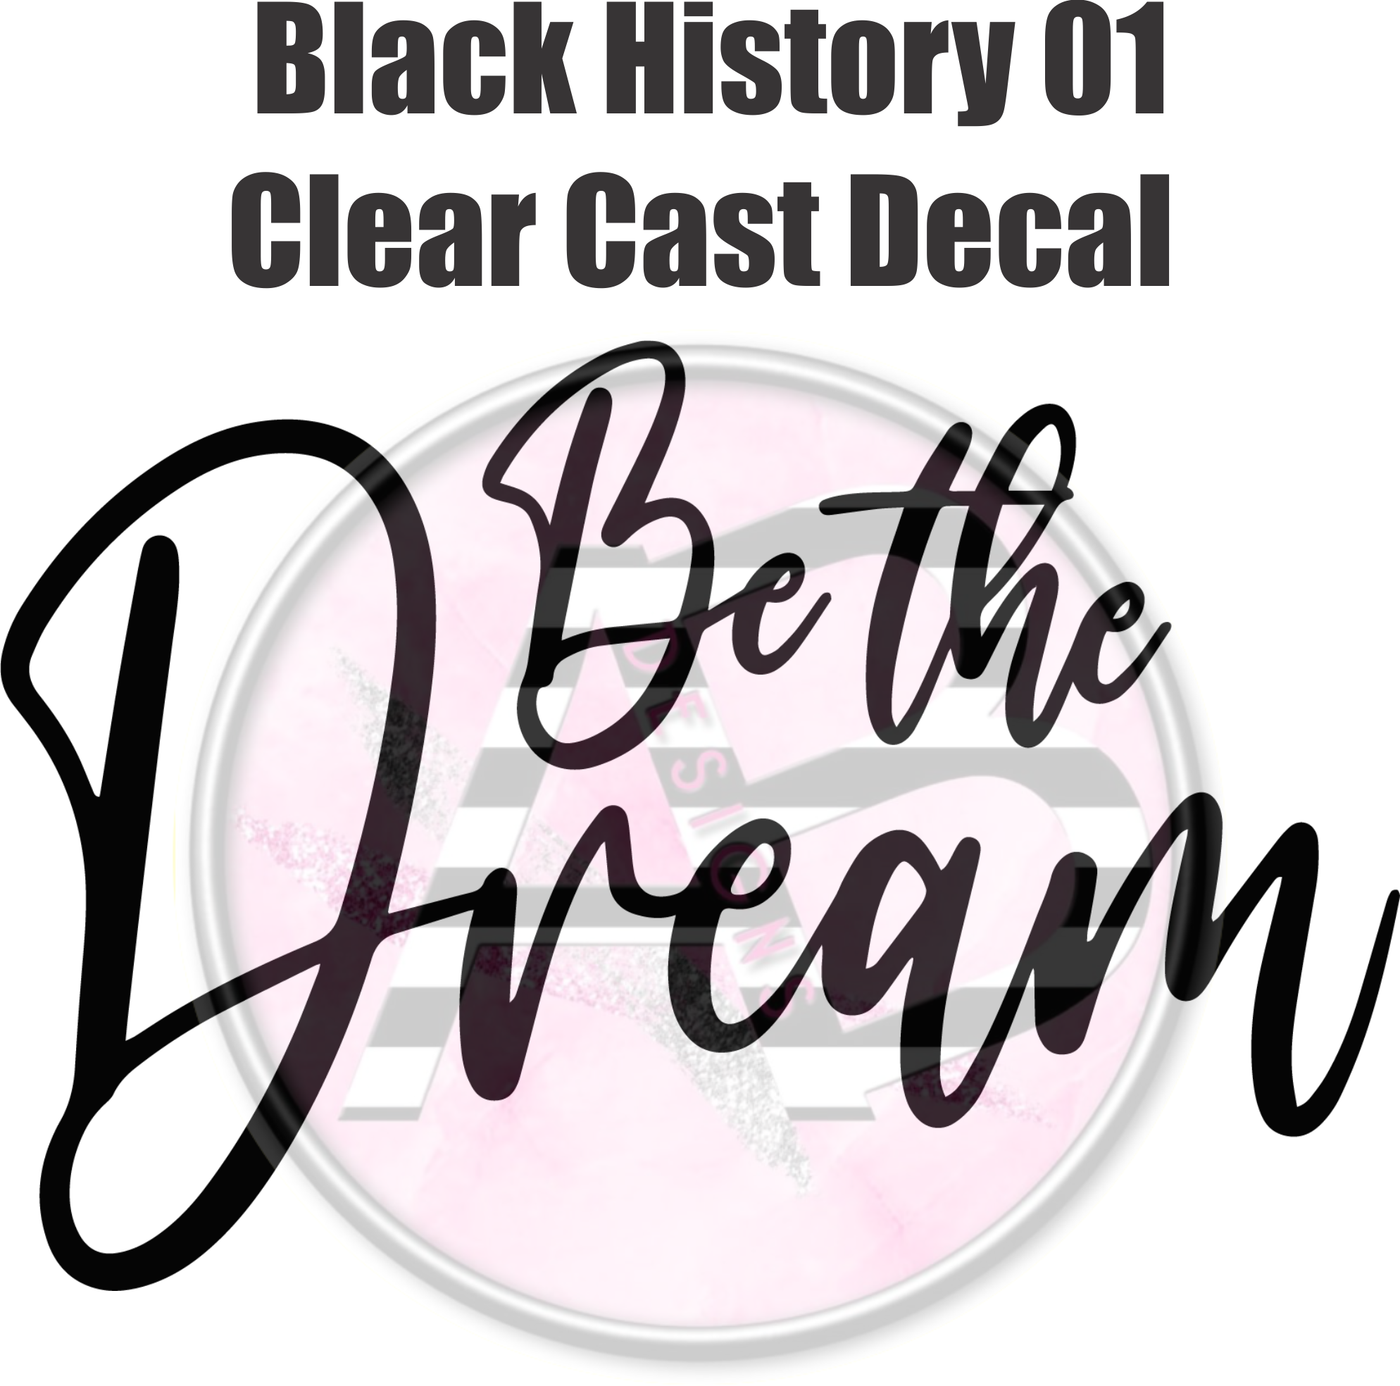 Black History 01 - Clear Cast Decal